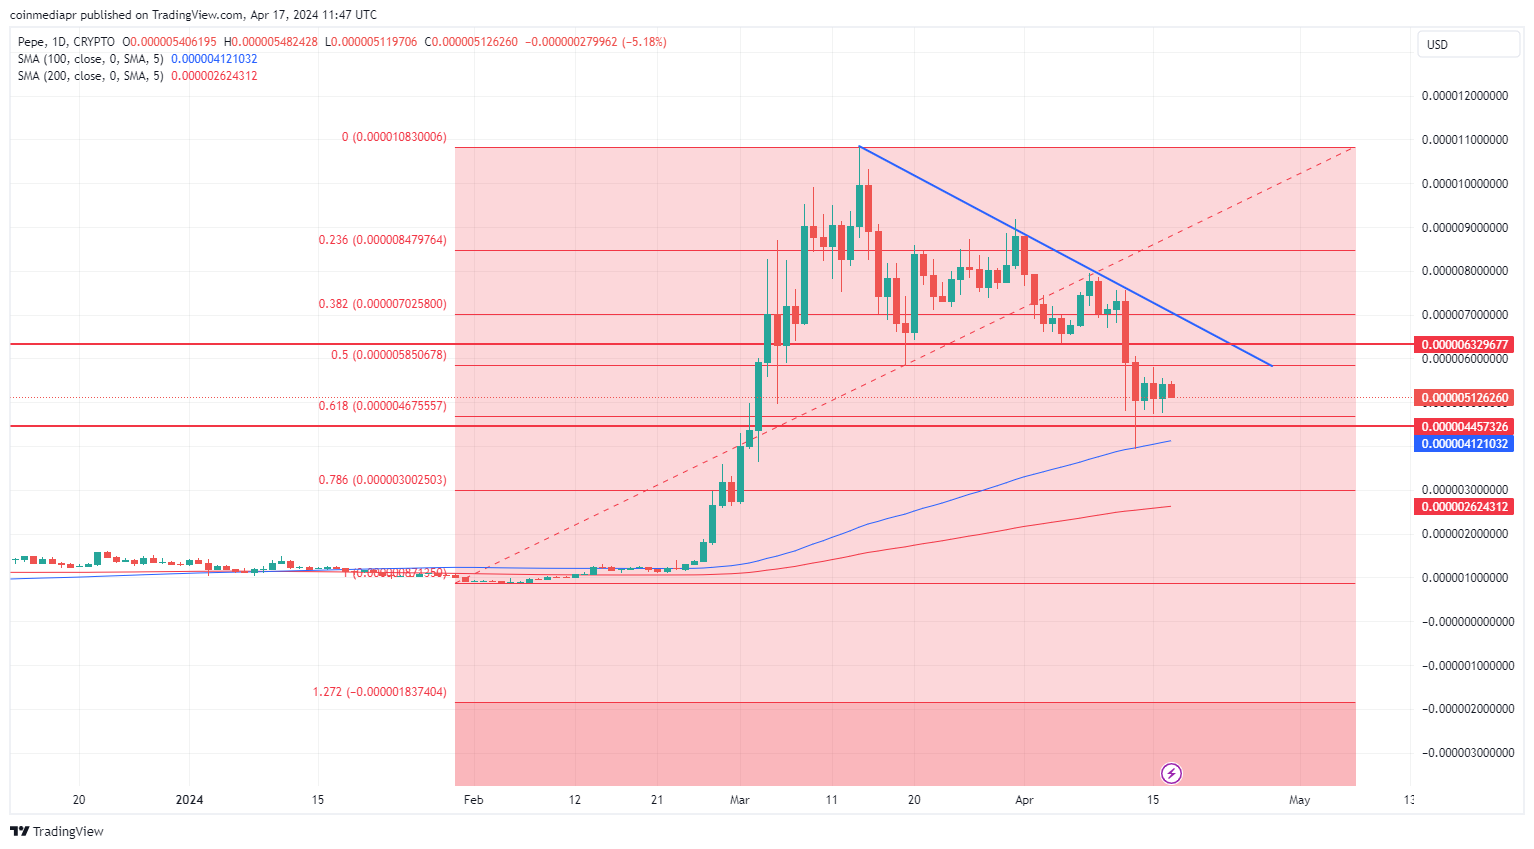 Pepe coin price daily chart